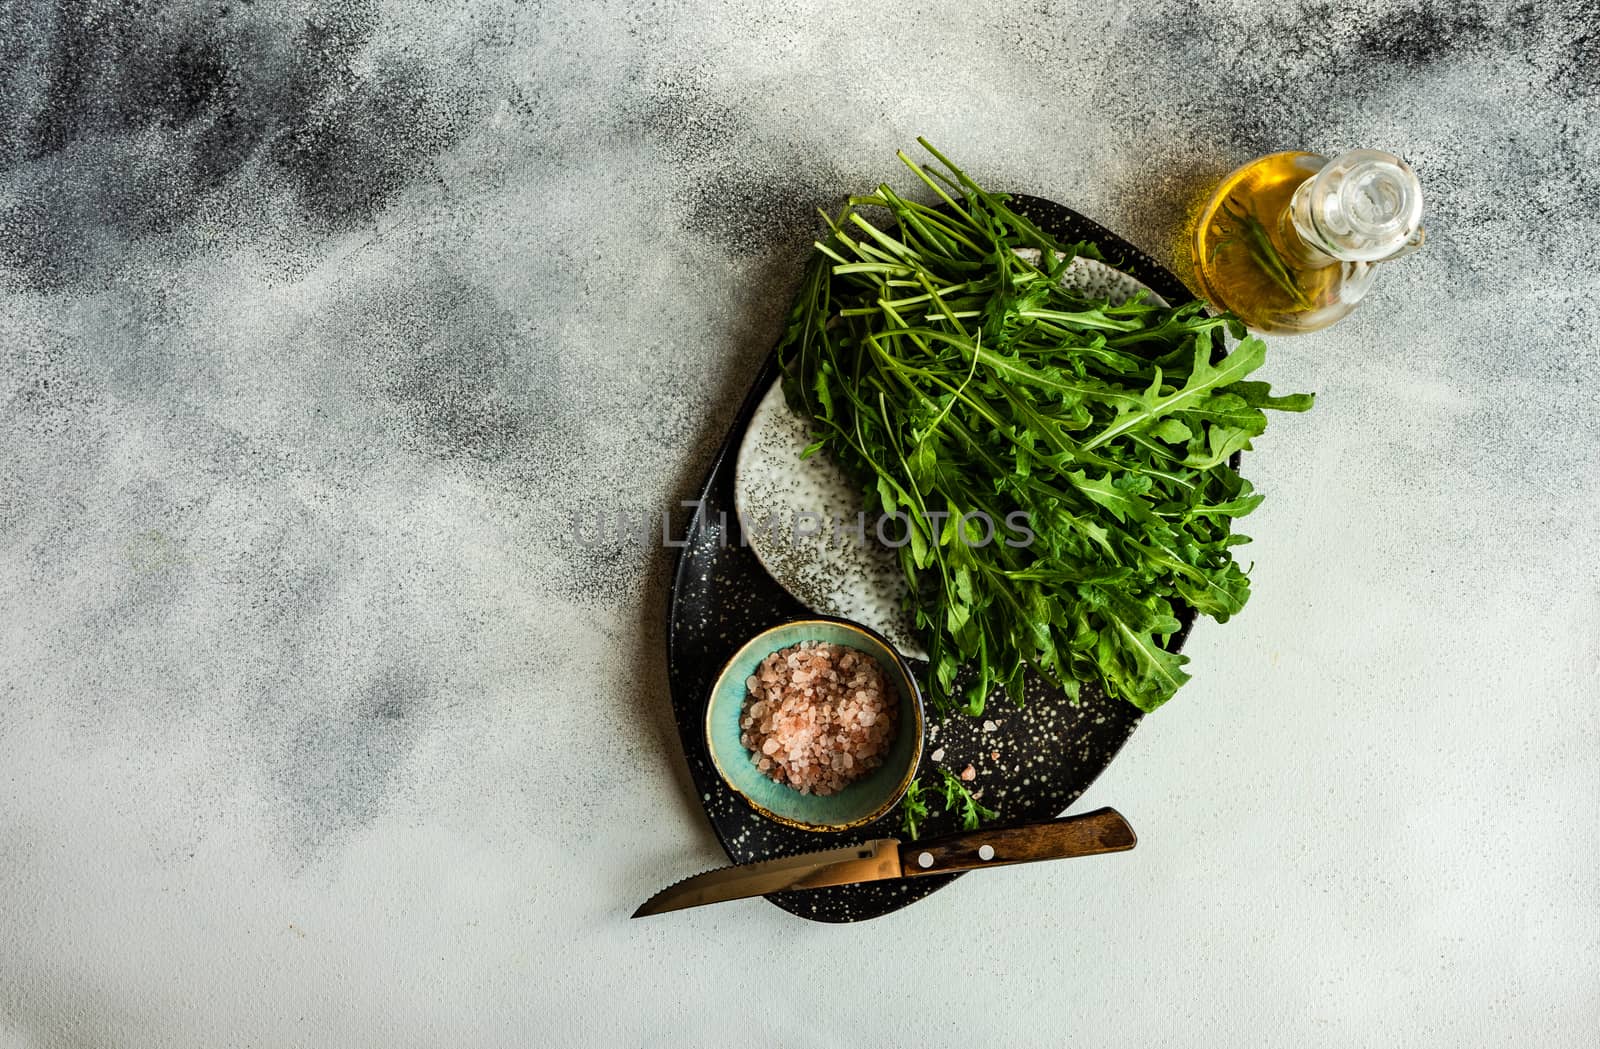 Healthy food concept with fresh organic arugula herb leaves on stone background with copy space